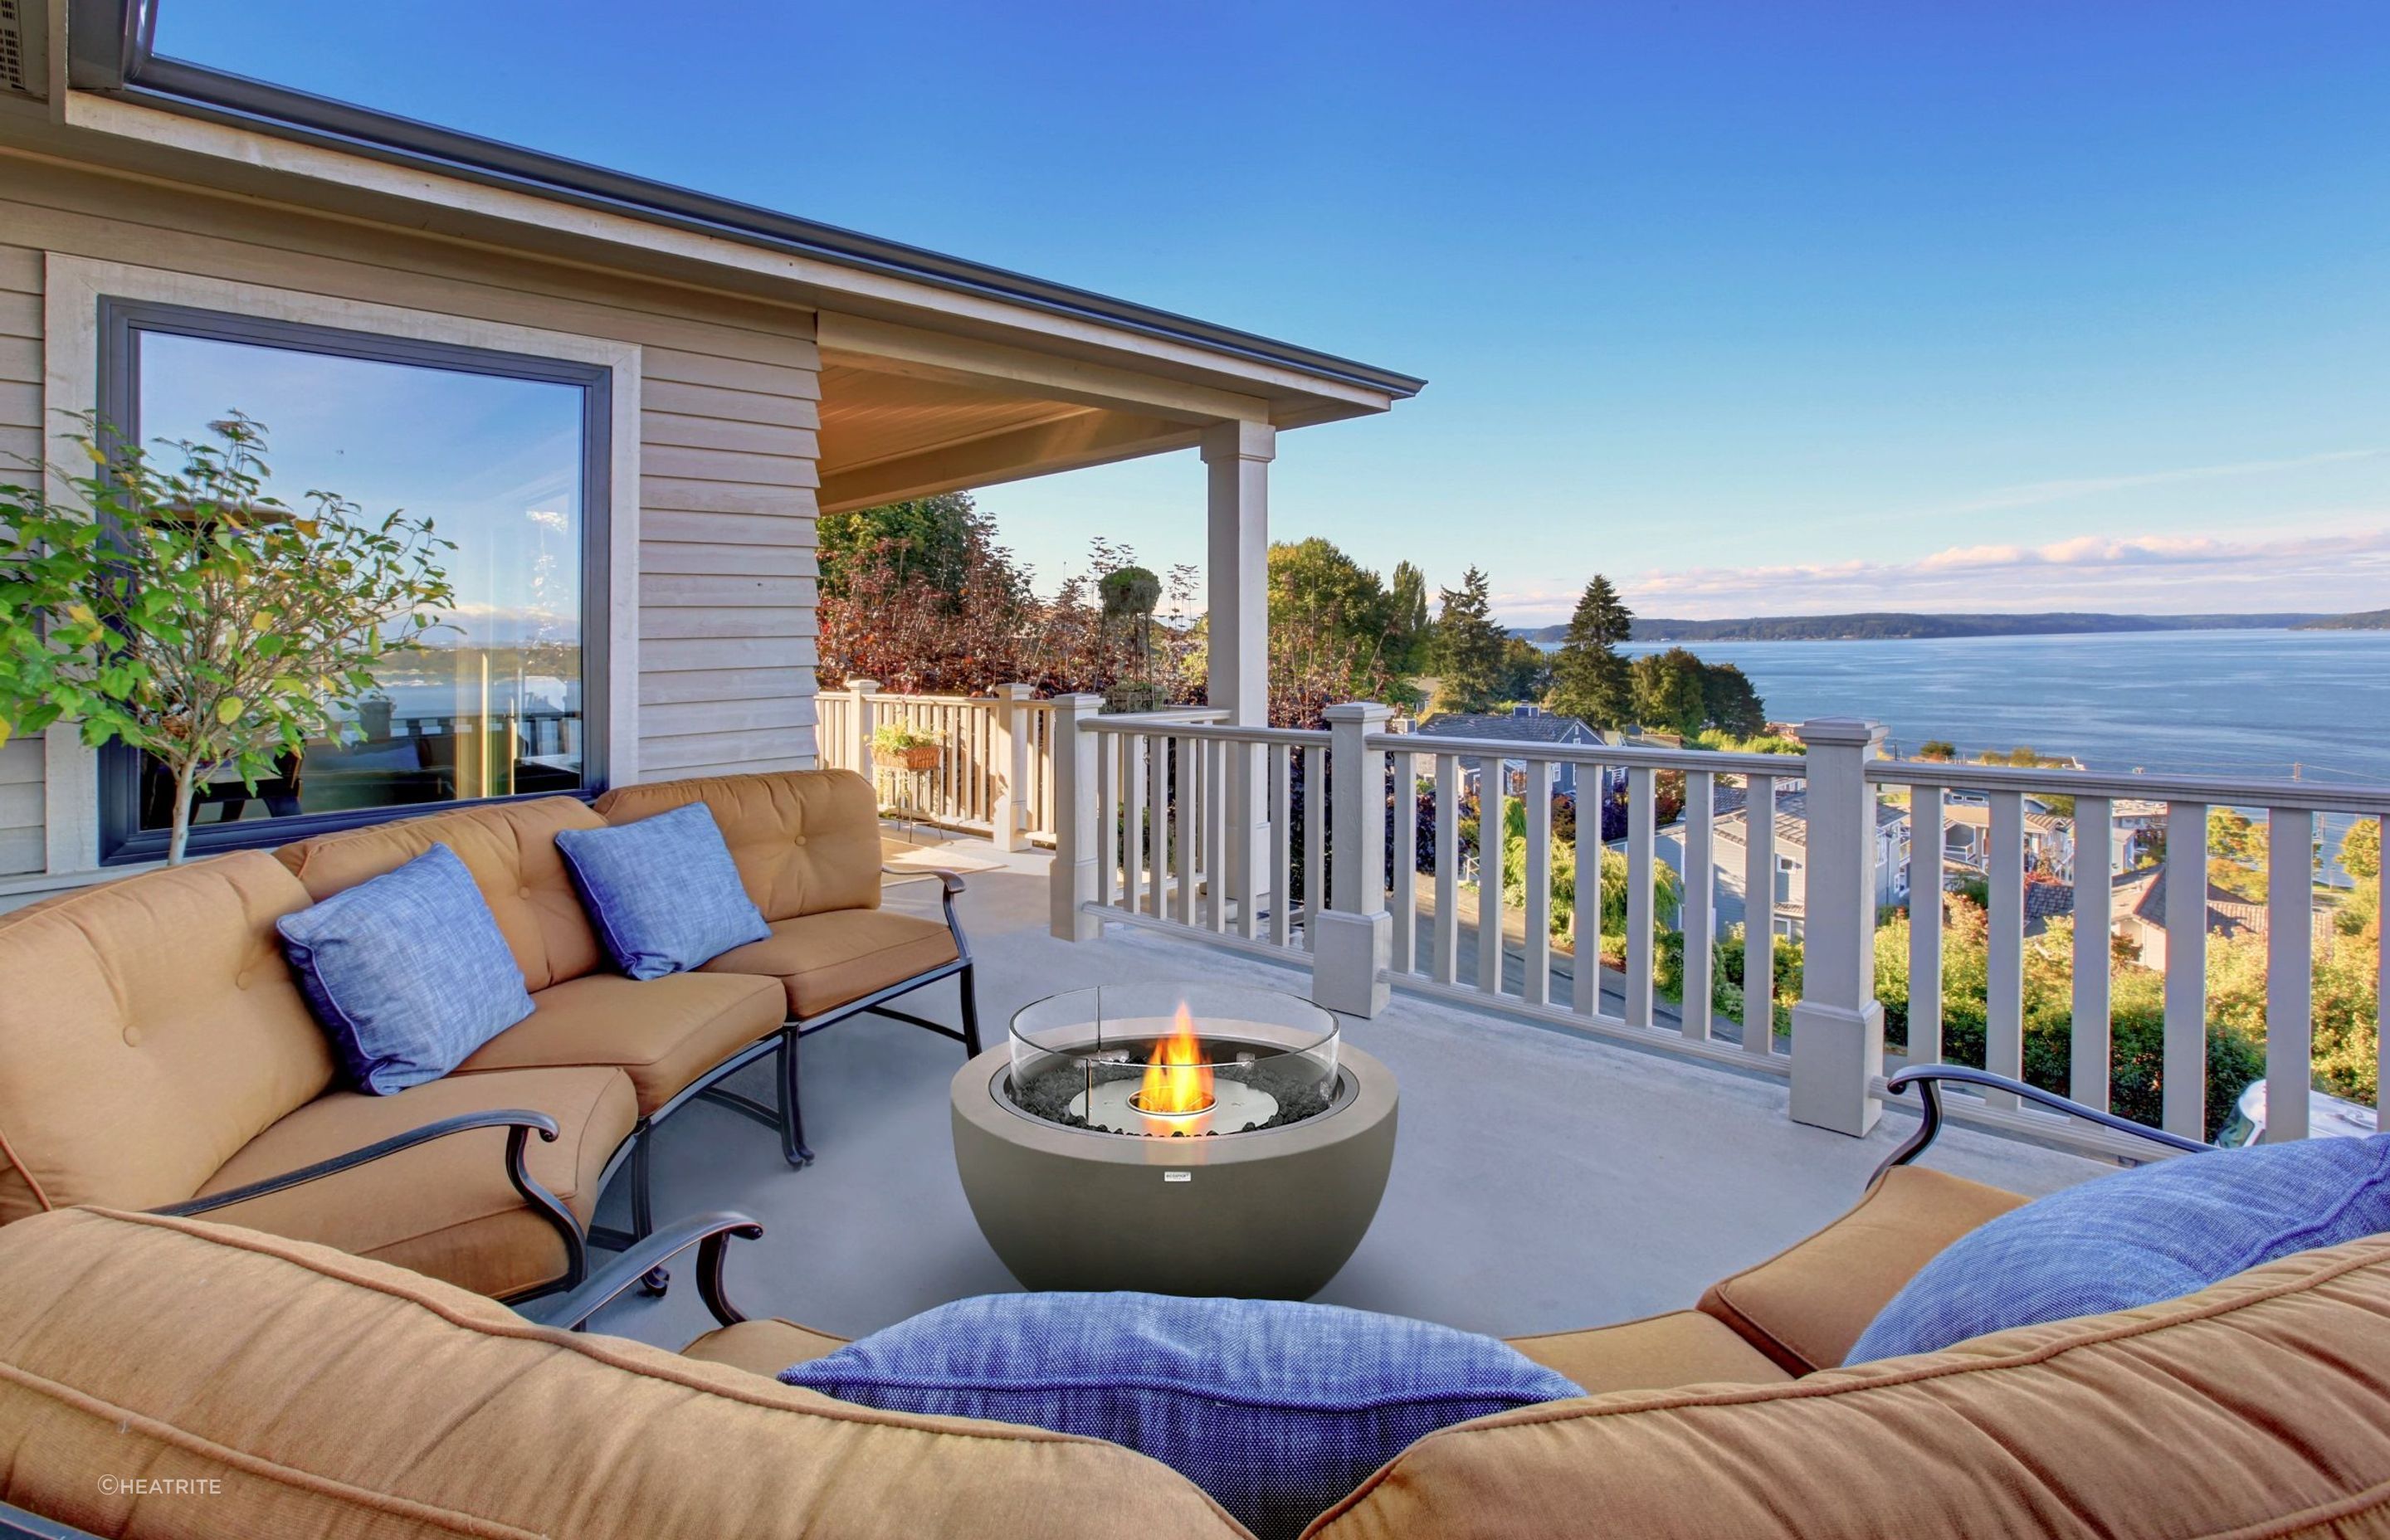 Your fire pit can help you make the most of an exquisite view, seen here with the Pod 30 Fire Pit.